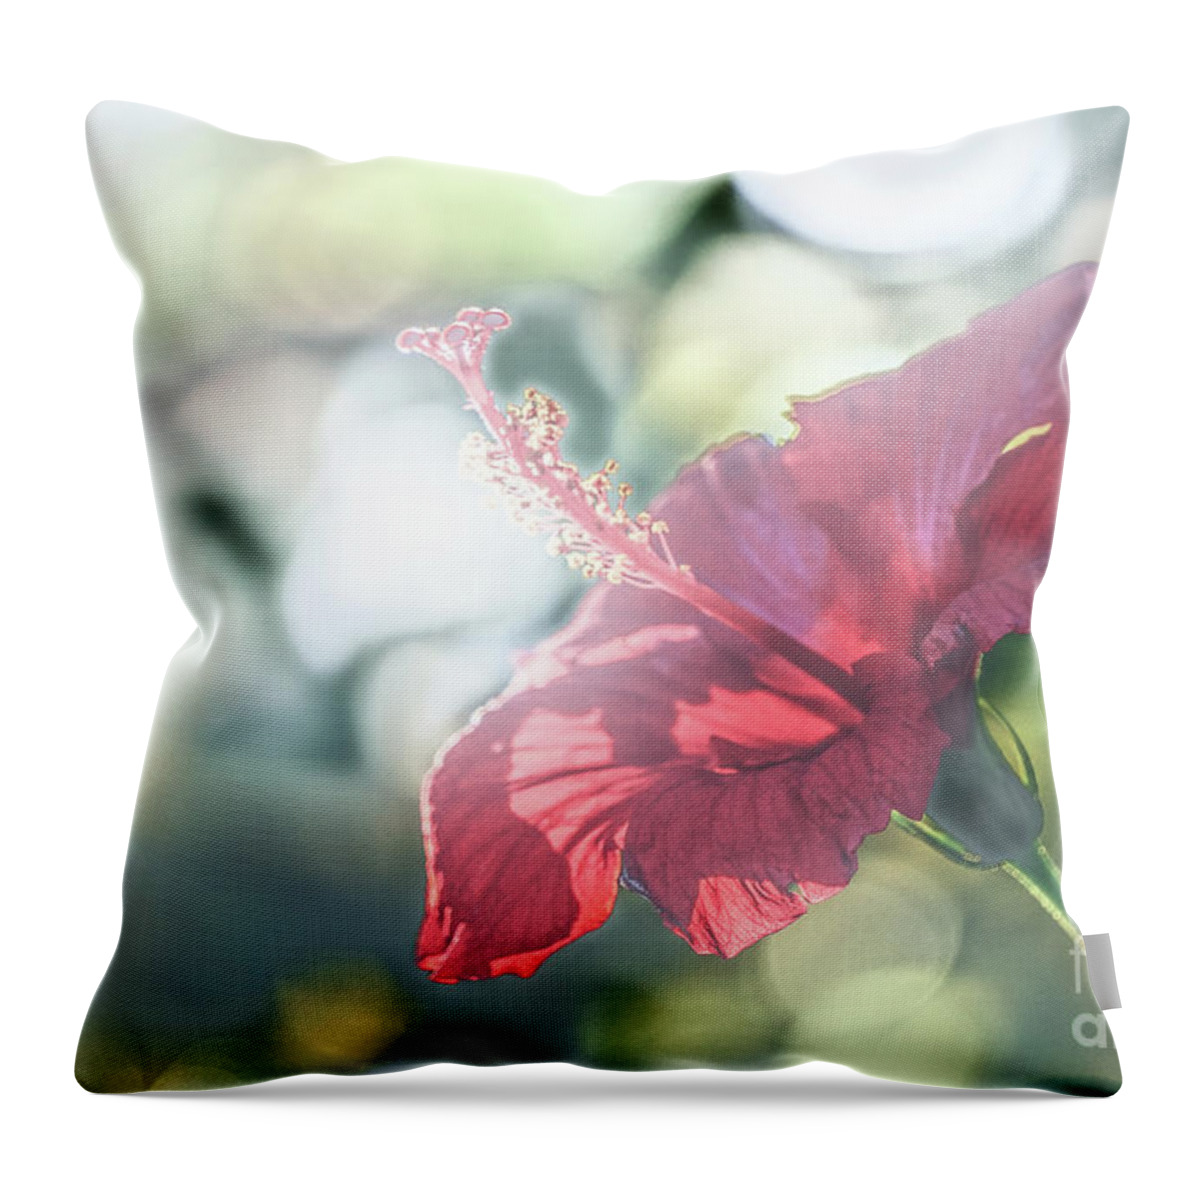 Flower Throw Pillow featuring the photograph Backlit Stamin by Darcy Dietrich